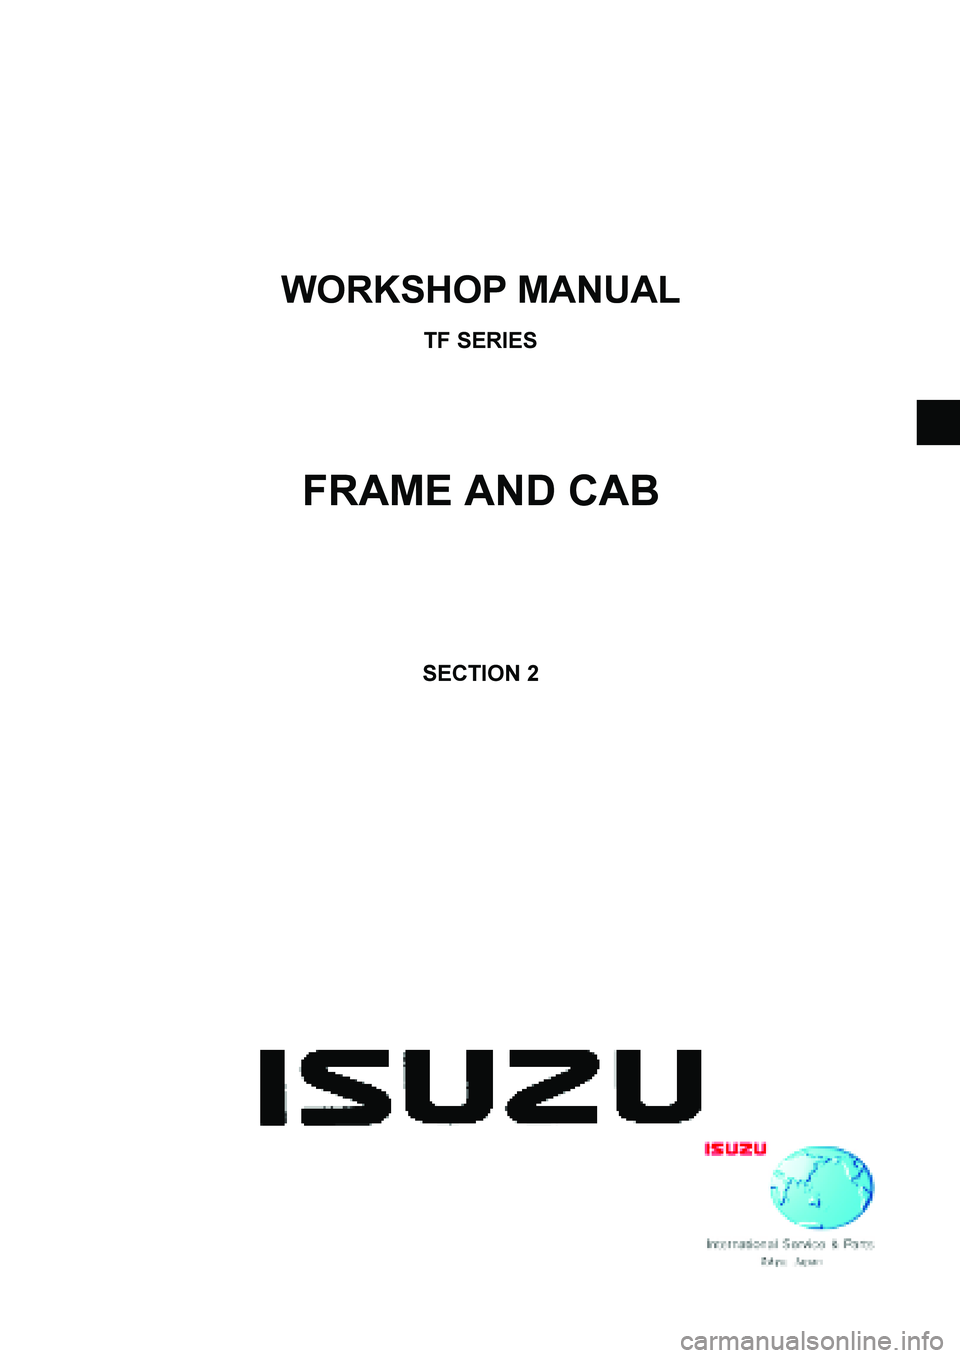 ISUZU TF SERIES 2004  Workshop Manual  
 
 
WORKSHOP MANUAL 
TF SERIES 
FRAME AND CAB 
 
SECTION 2 
  